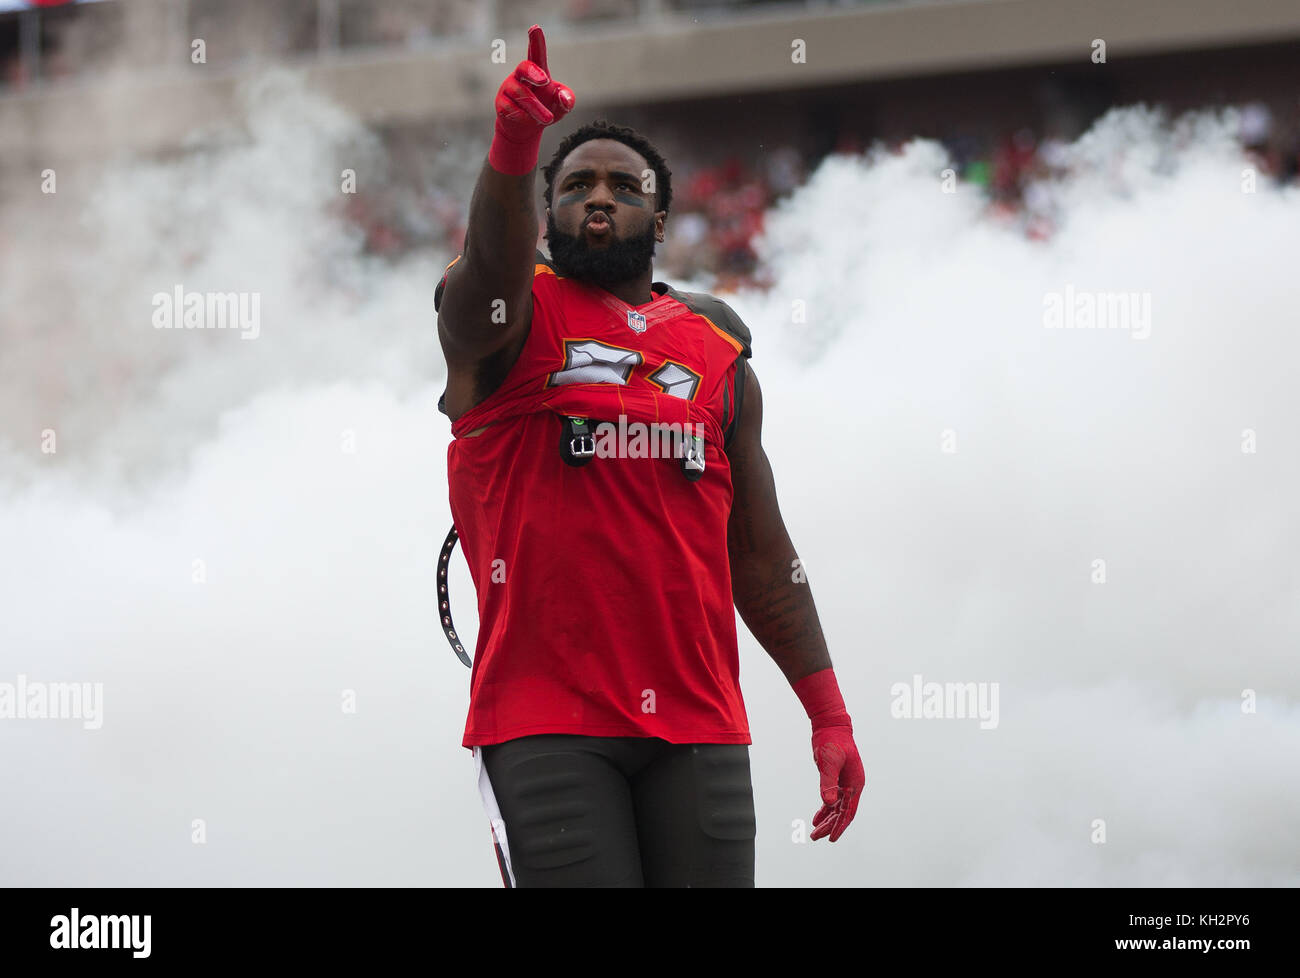 Florida, USA. 12th Nov, 2017. LOREN ELLIOTT | Times .Tampa Bay Buccaneers defensive end Robert Ayers (91) takes the field before an NFL game between the New York Jets and Tampa Bay Buccaneers at Raymond James Stadium in Tampa, Fla., on Sunday, Nov. 12, 2017. Credit: Loren Elliott/Tampa Bay Times/ZUMA Wire/Alamy Live News Stock Photo